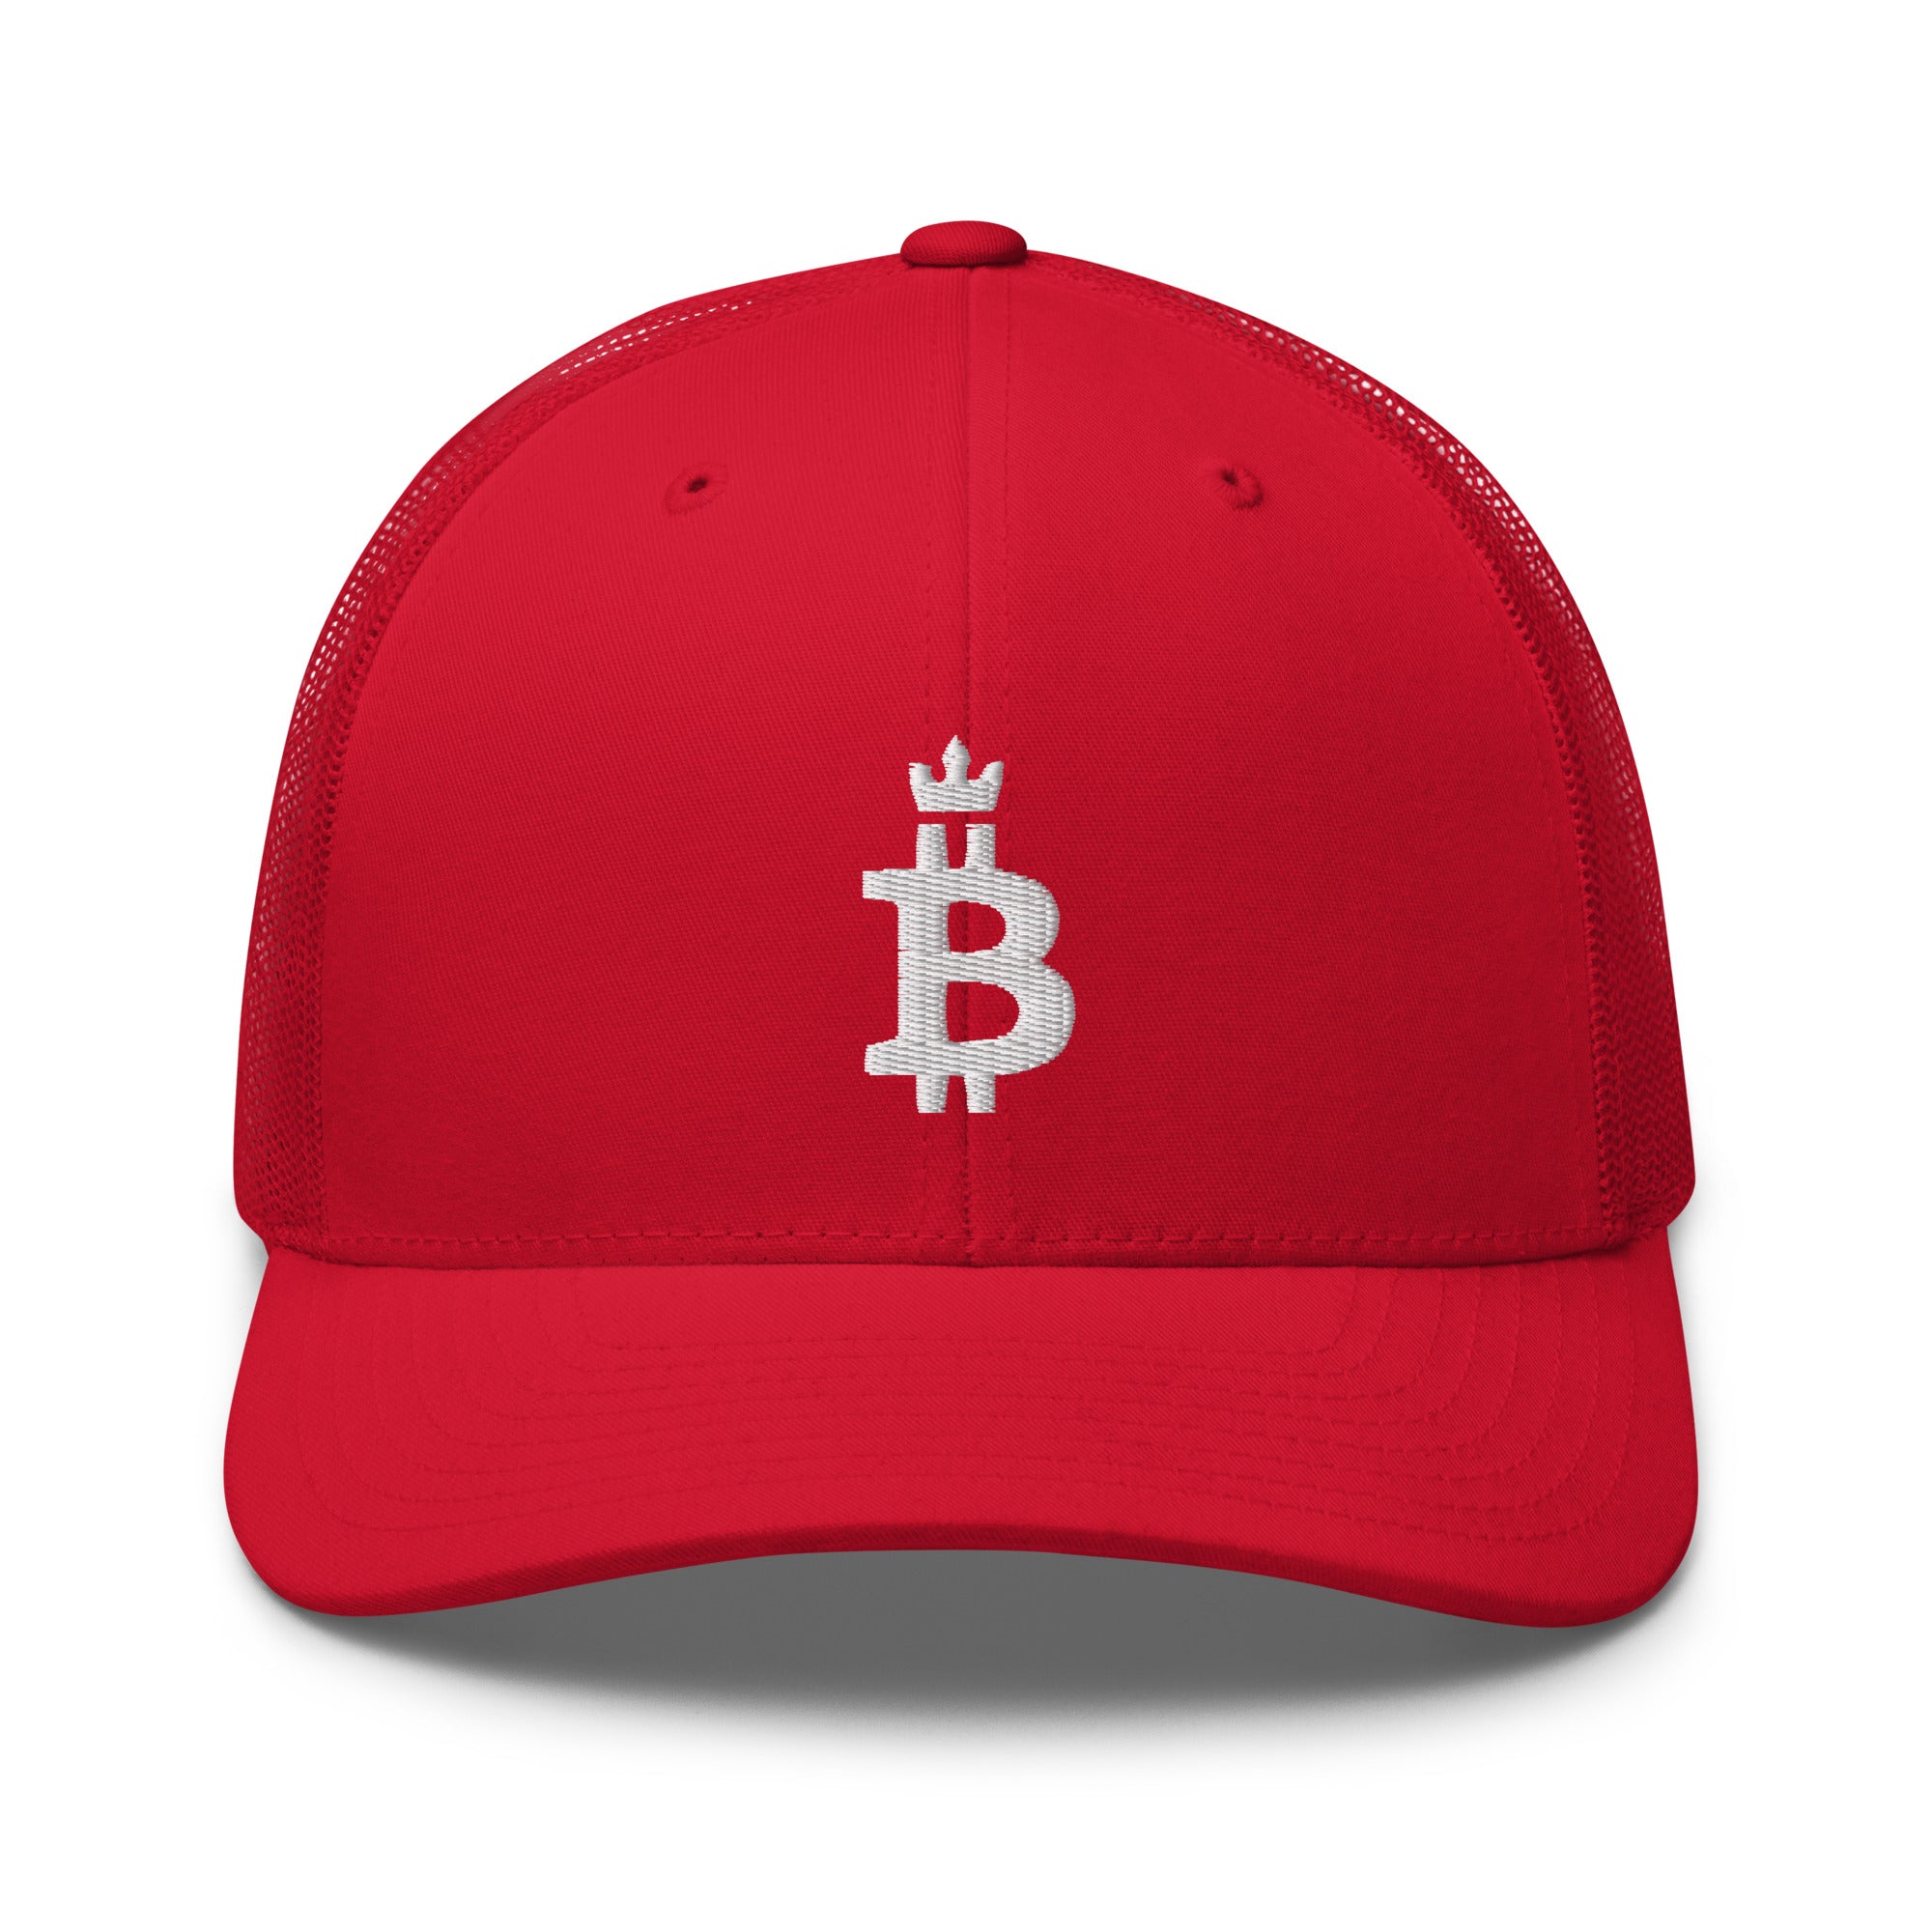 Bitcoin Hat - The Bitcoin Dominance Trucker Hat features an embroidered Bitcoin design on a red cap. Front view.